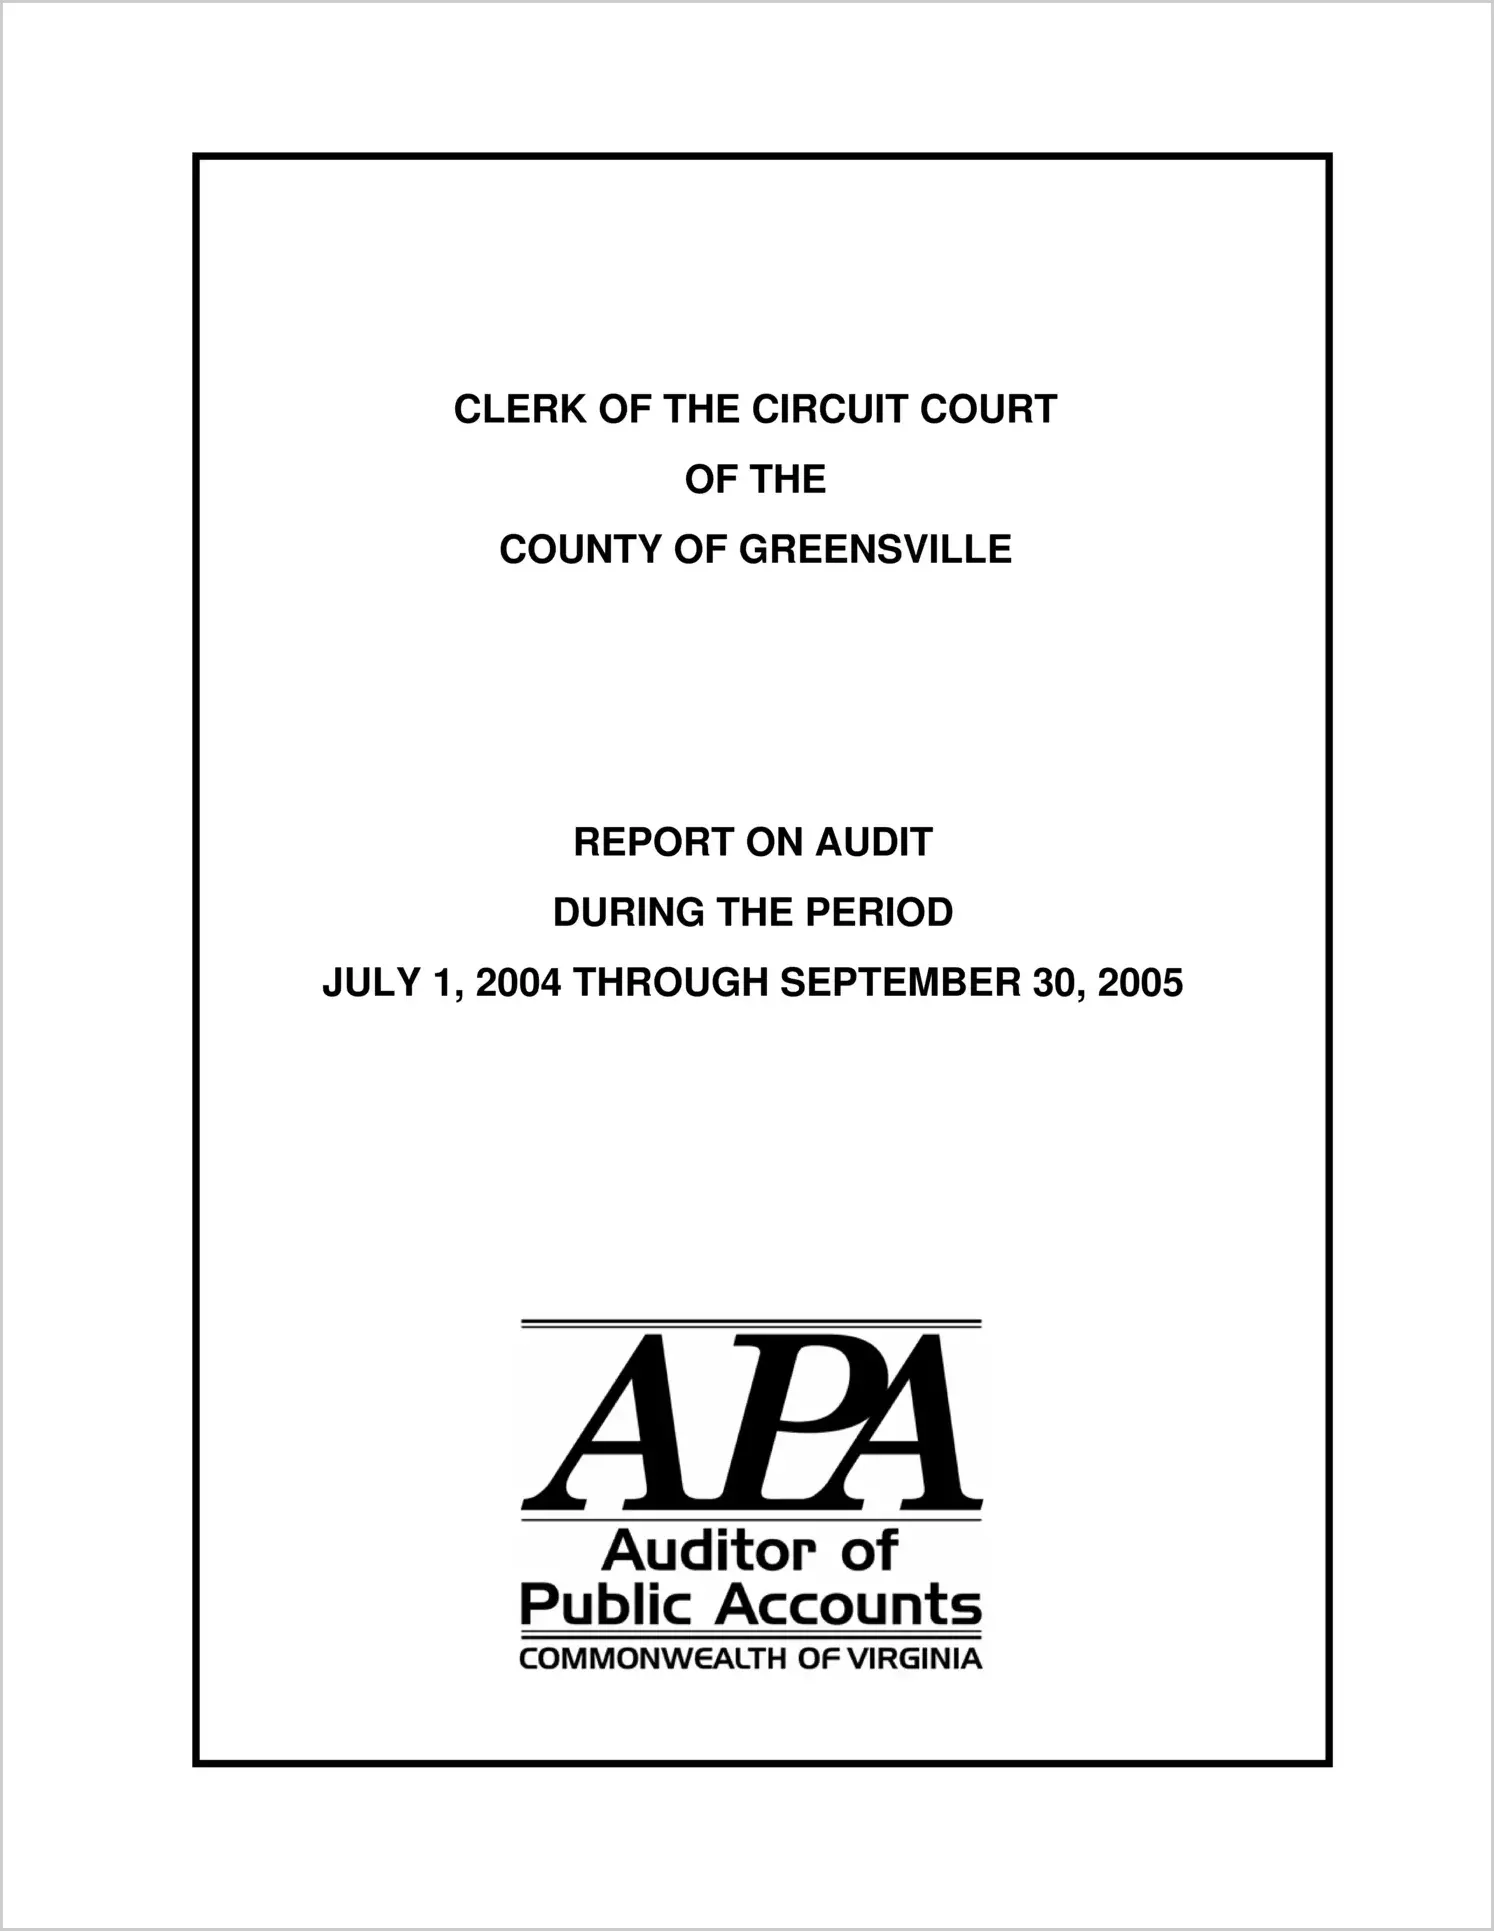 Clerk of the Circuit Court of the County of Greensville for the period July 1, 2004 through September 30, 2005